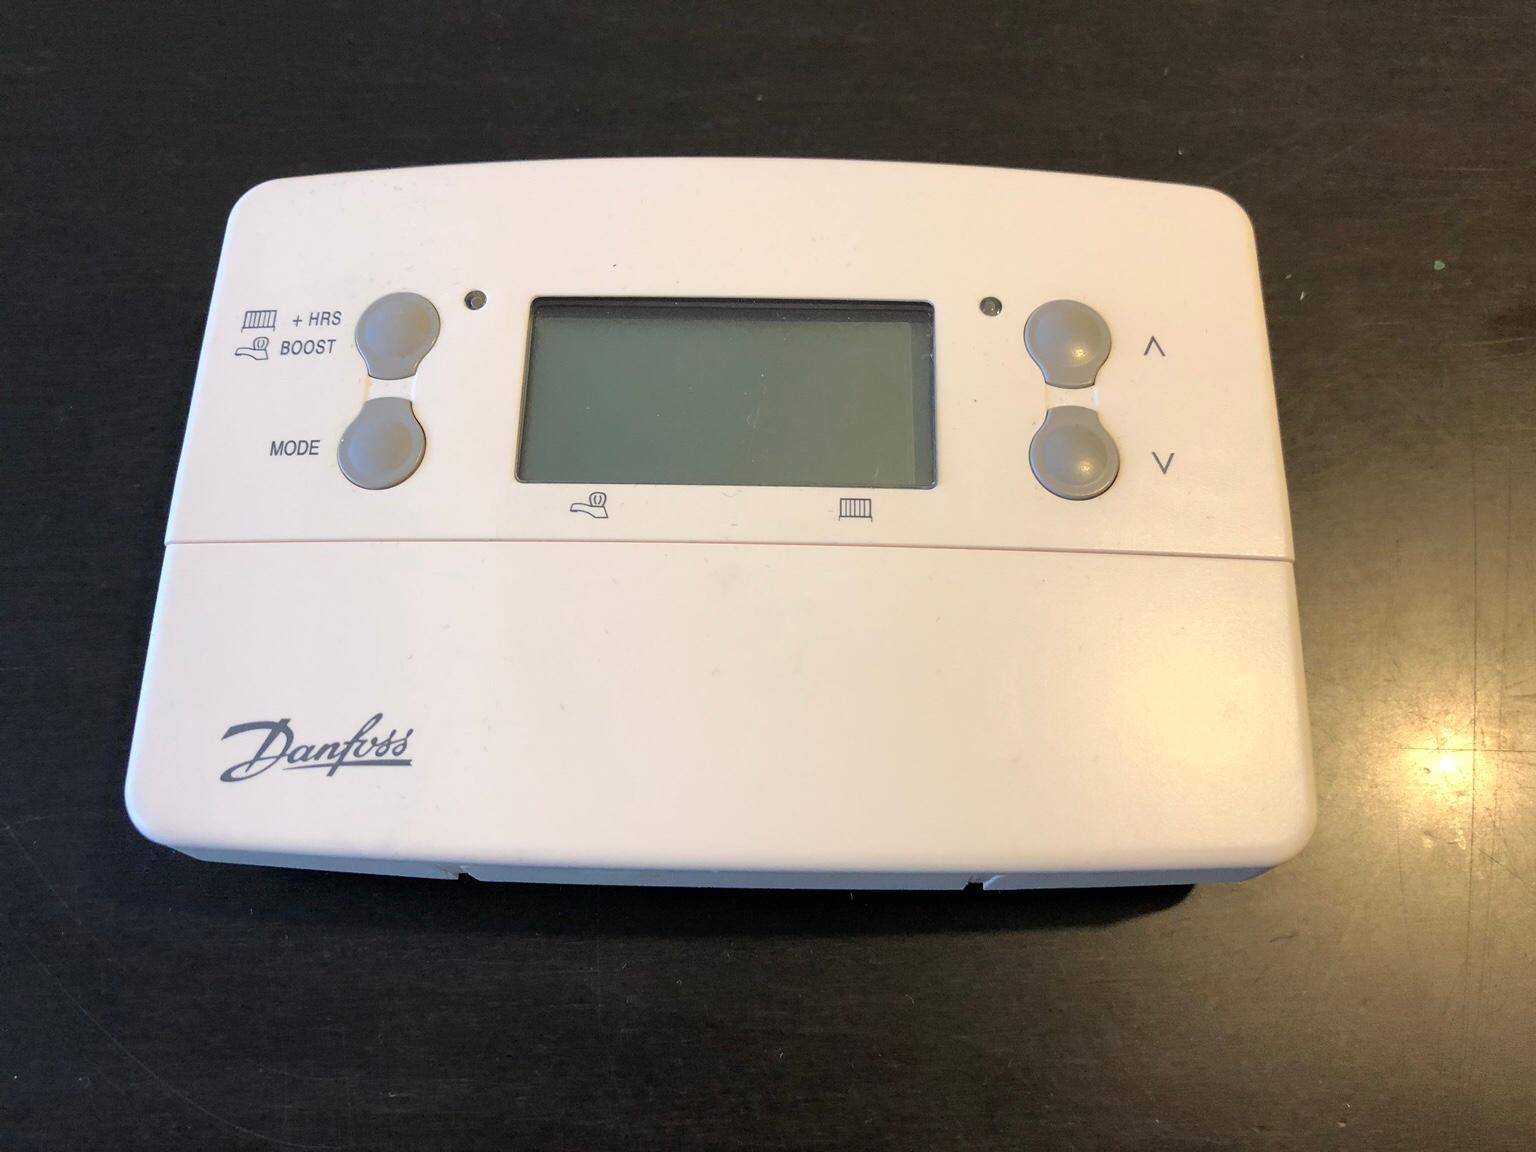 Danfoss TP9000MA-Si 7 Day Programmable Room Thermostat TP9000 087N789200